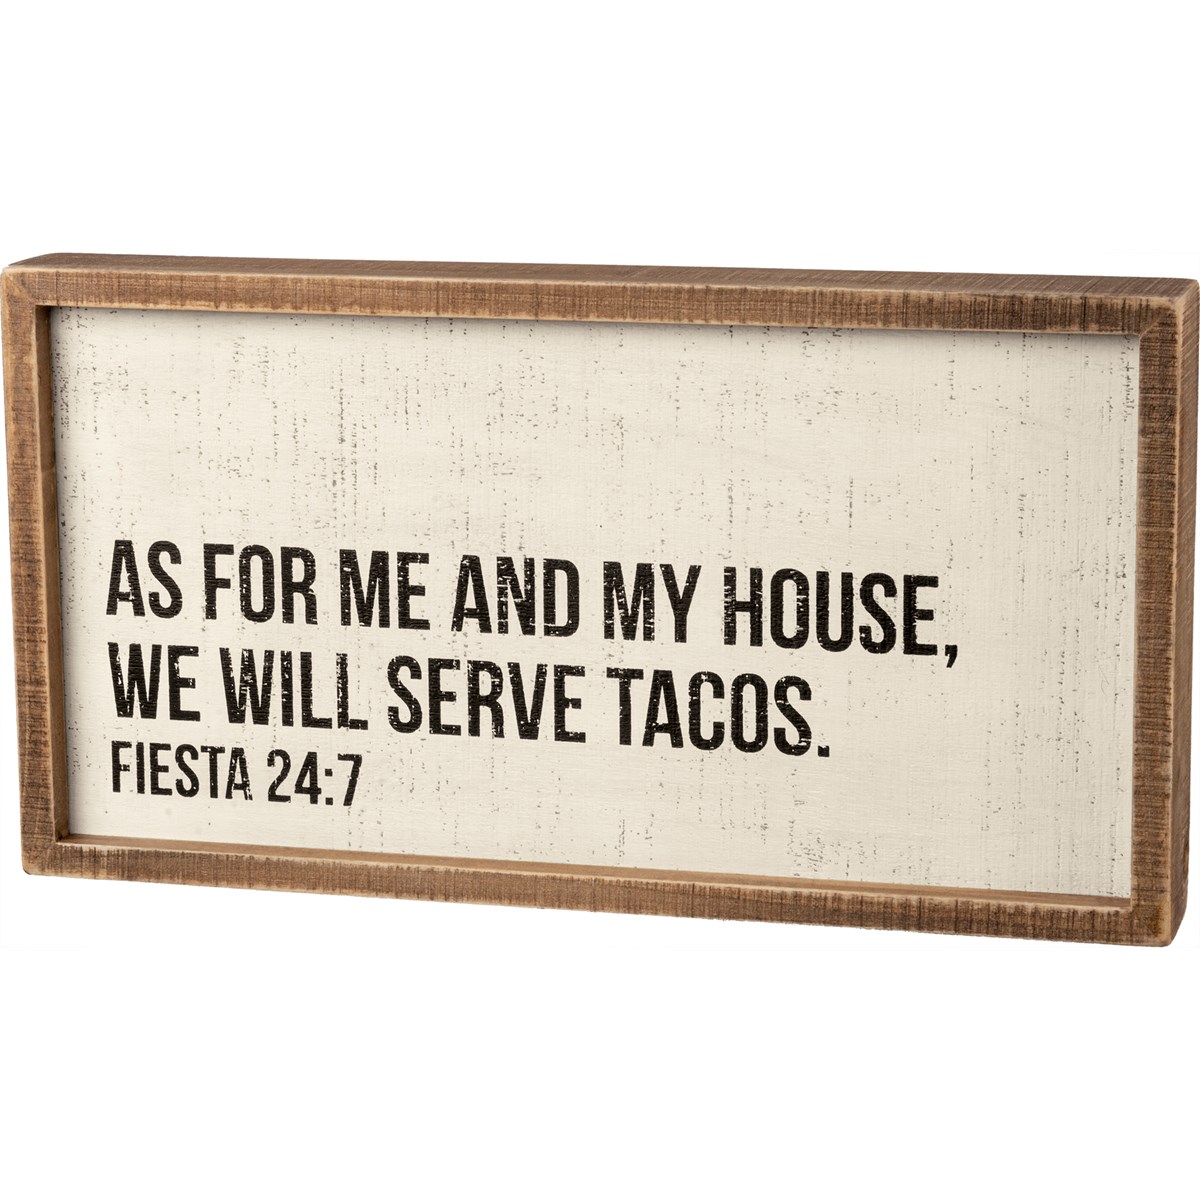 We Will Serve Tacos Inset Box Sign - Wood